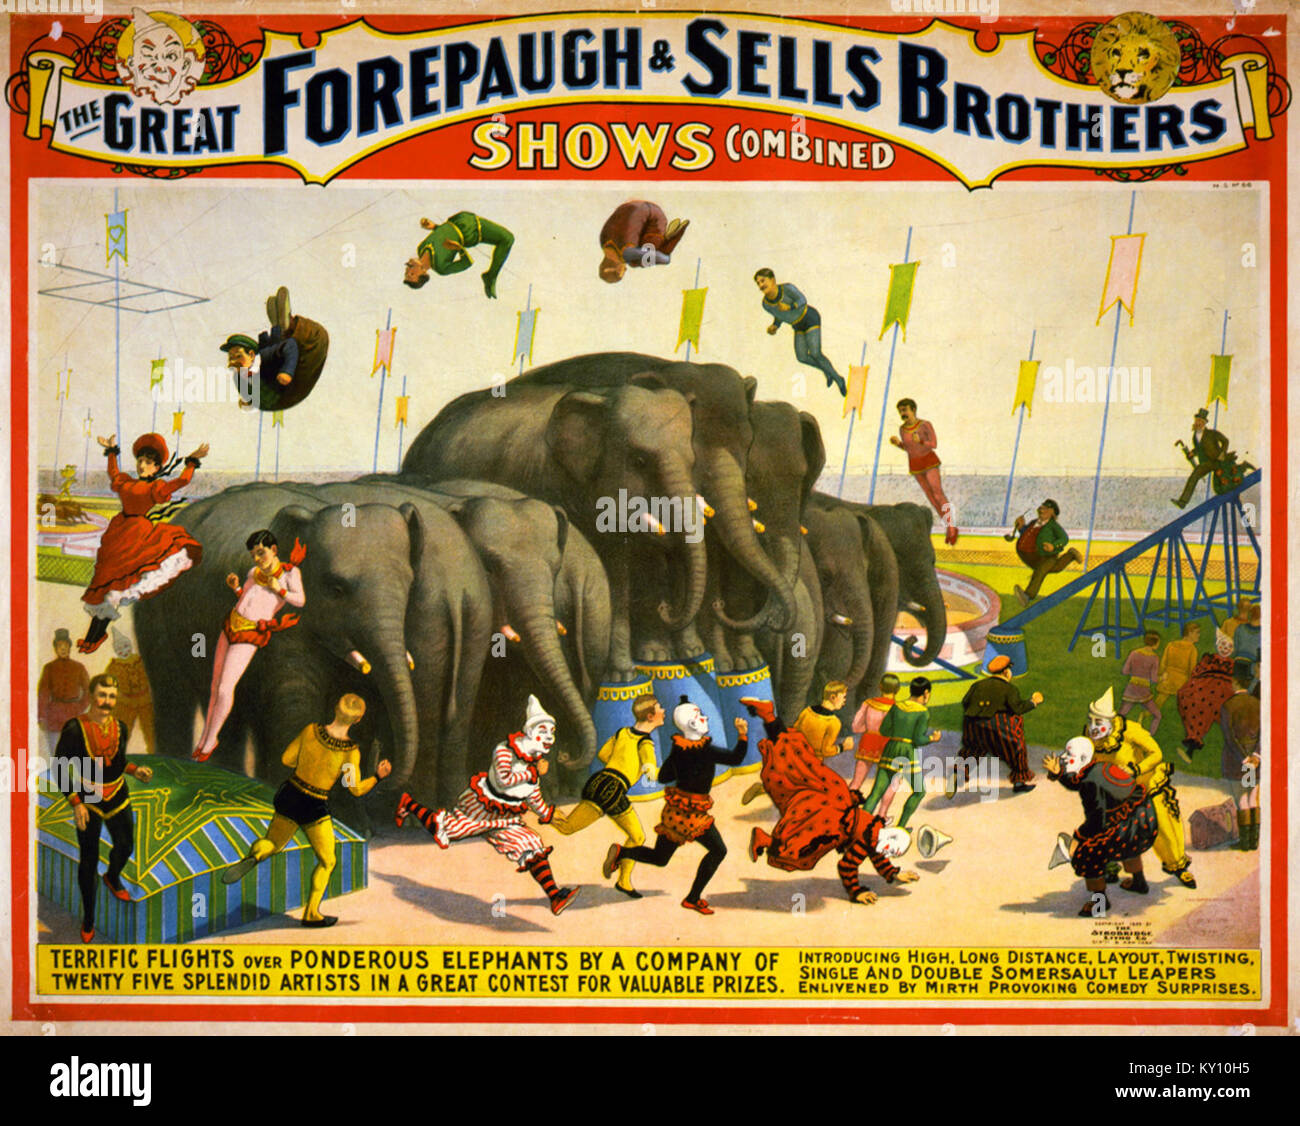 Flickr - …trialsanderrors - Terrific flights over ponderous elephants, poster for Forepaugh ^ Sells Brothers, ca. 1899 Stock Photo